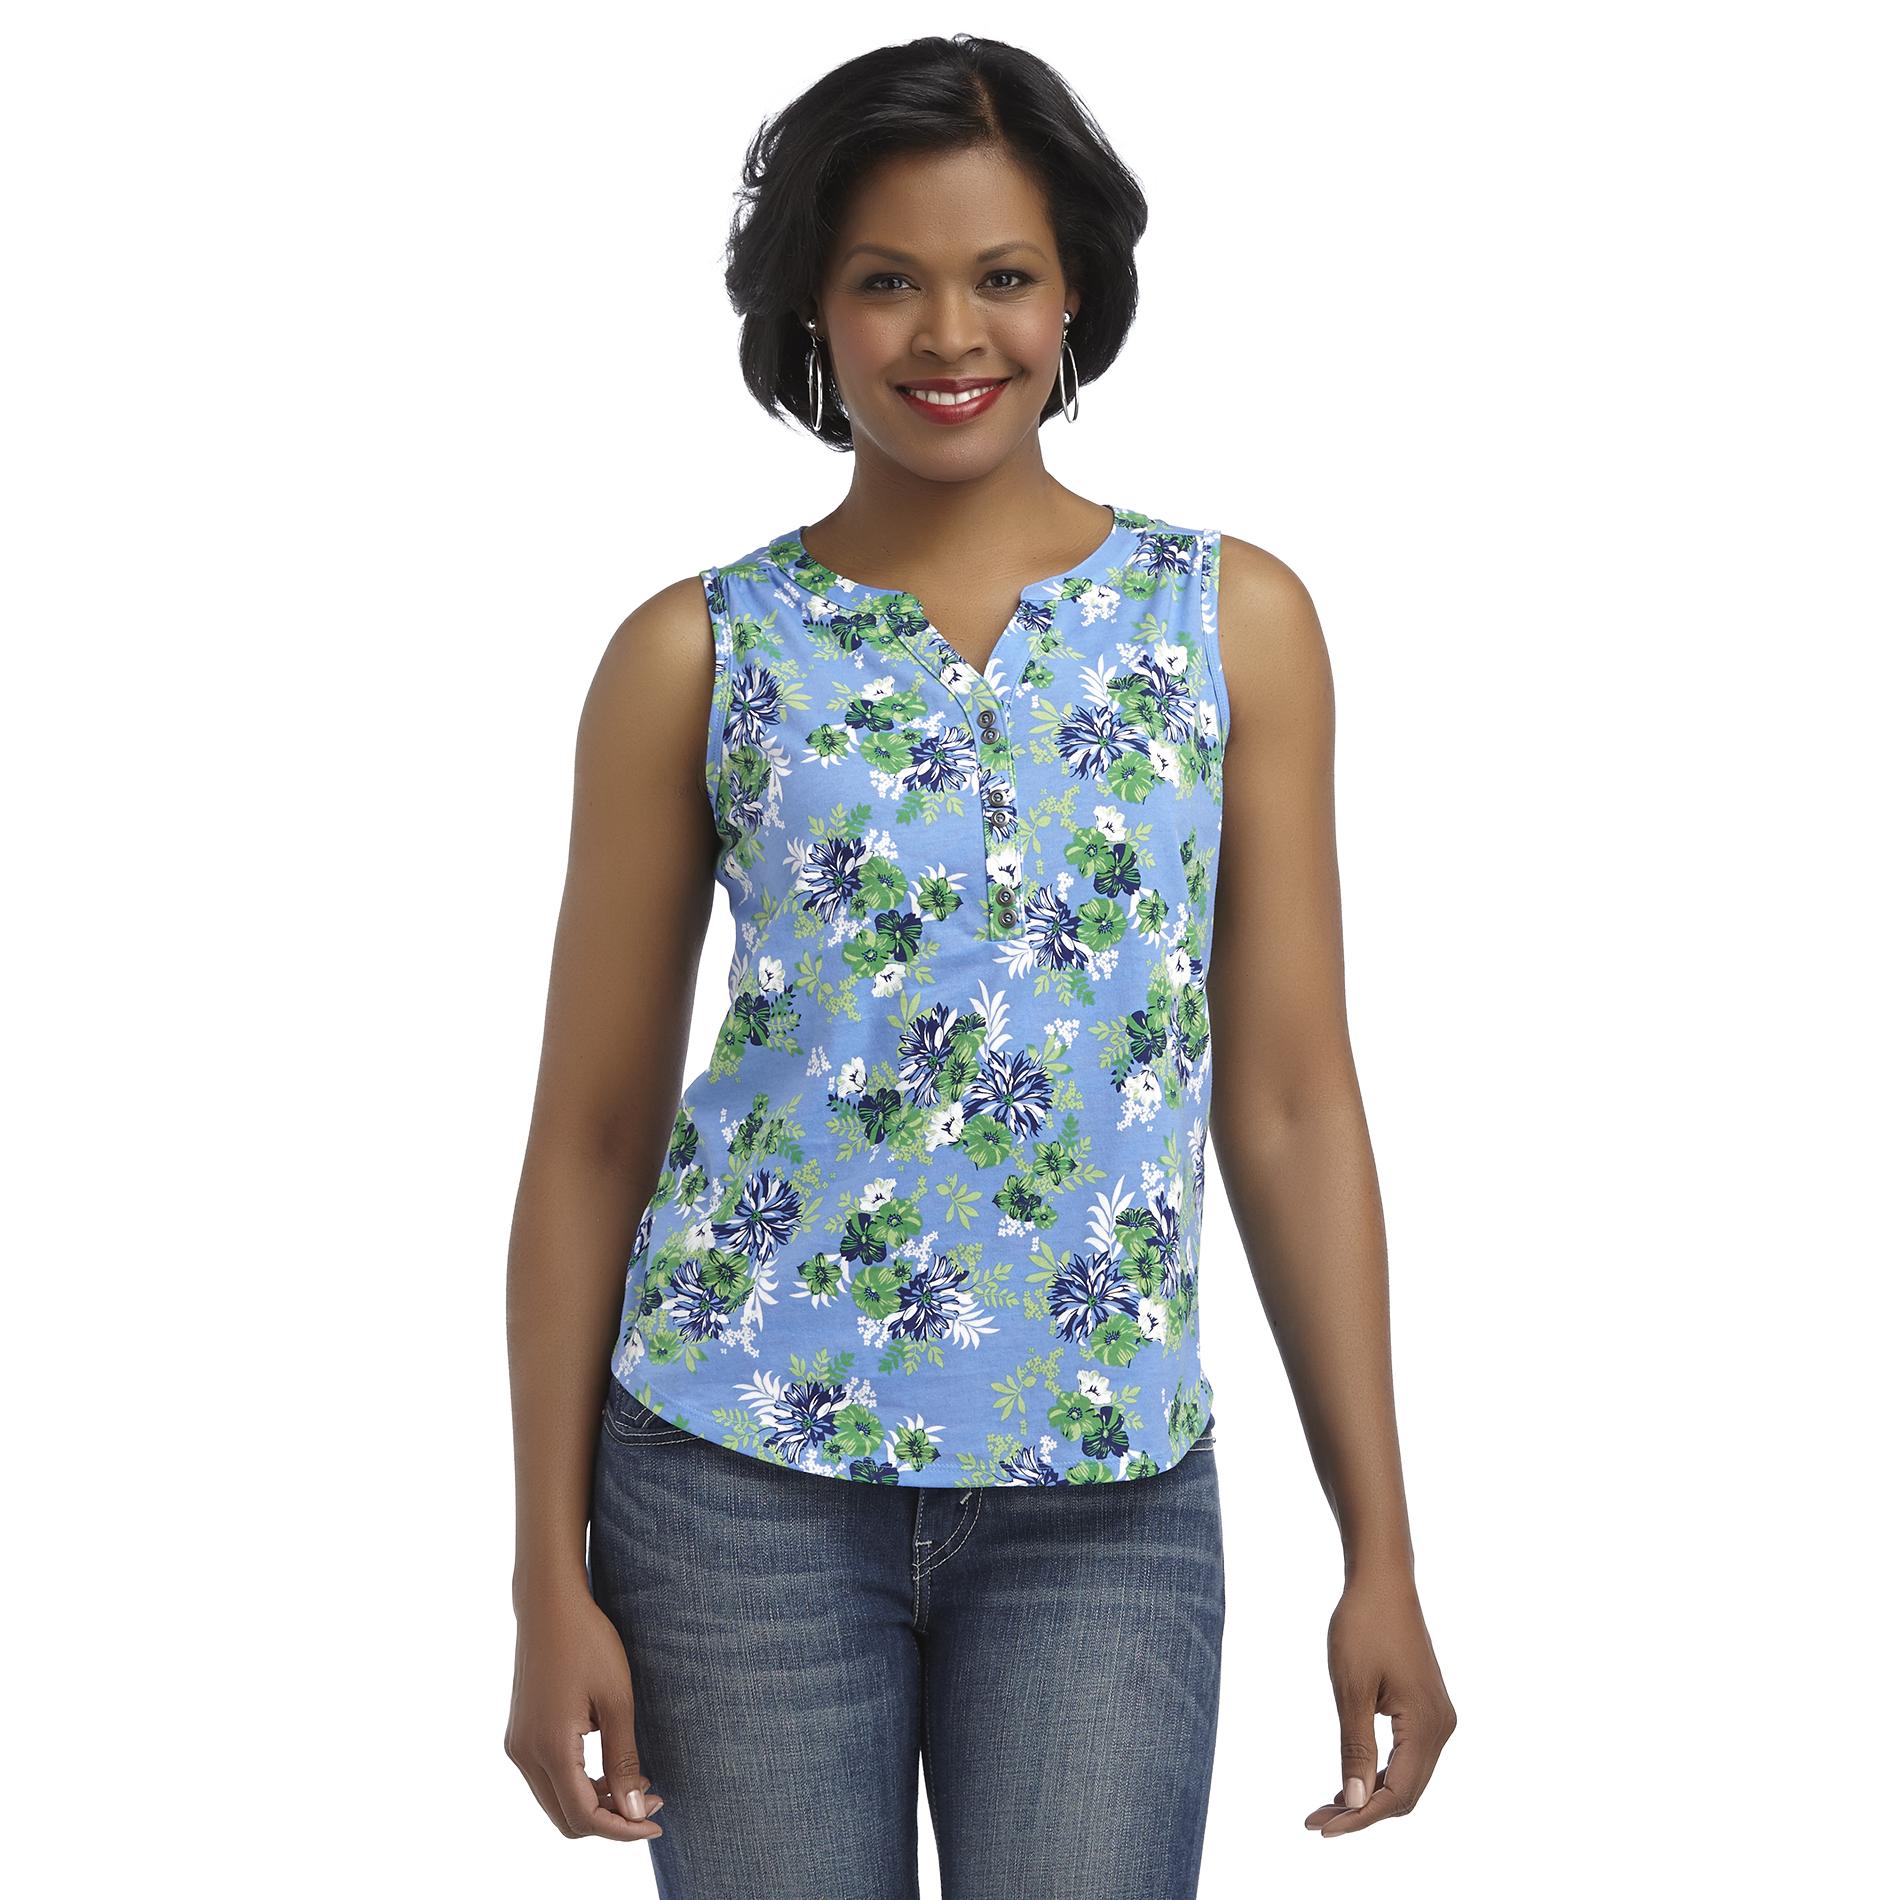 Basic Editions Women's Sleeveless Top - Floral